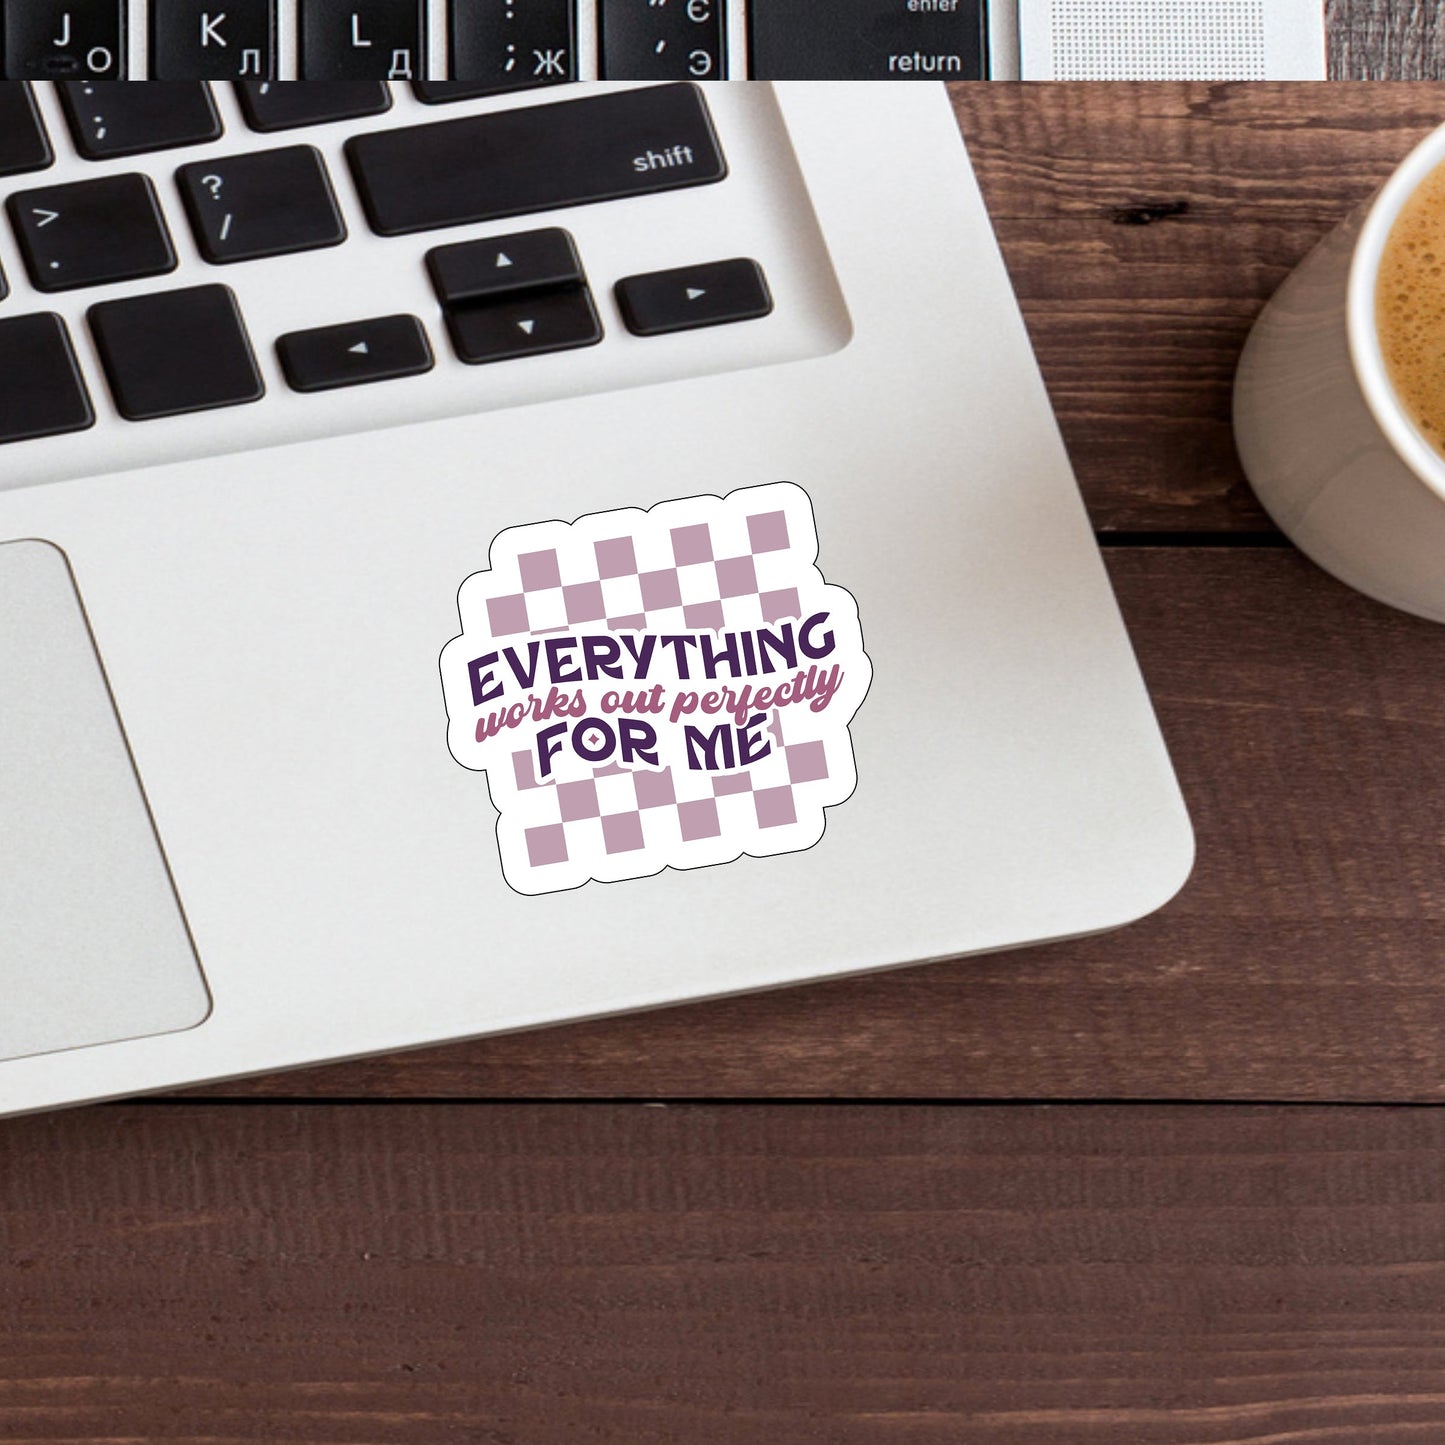 Everything works out perfectly for me  Sticker,  Vinyl sticker, laptop sticker, Tablet sticker